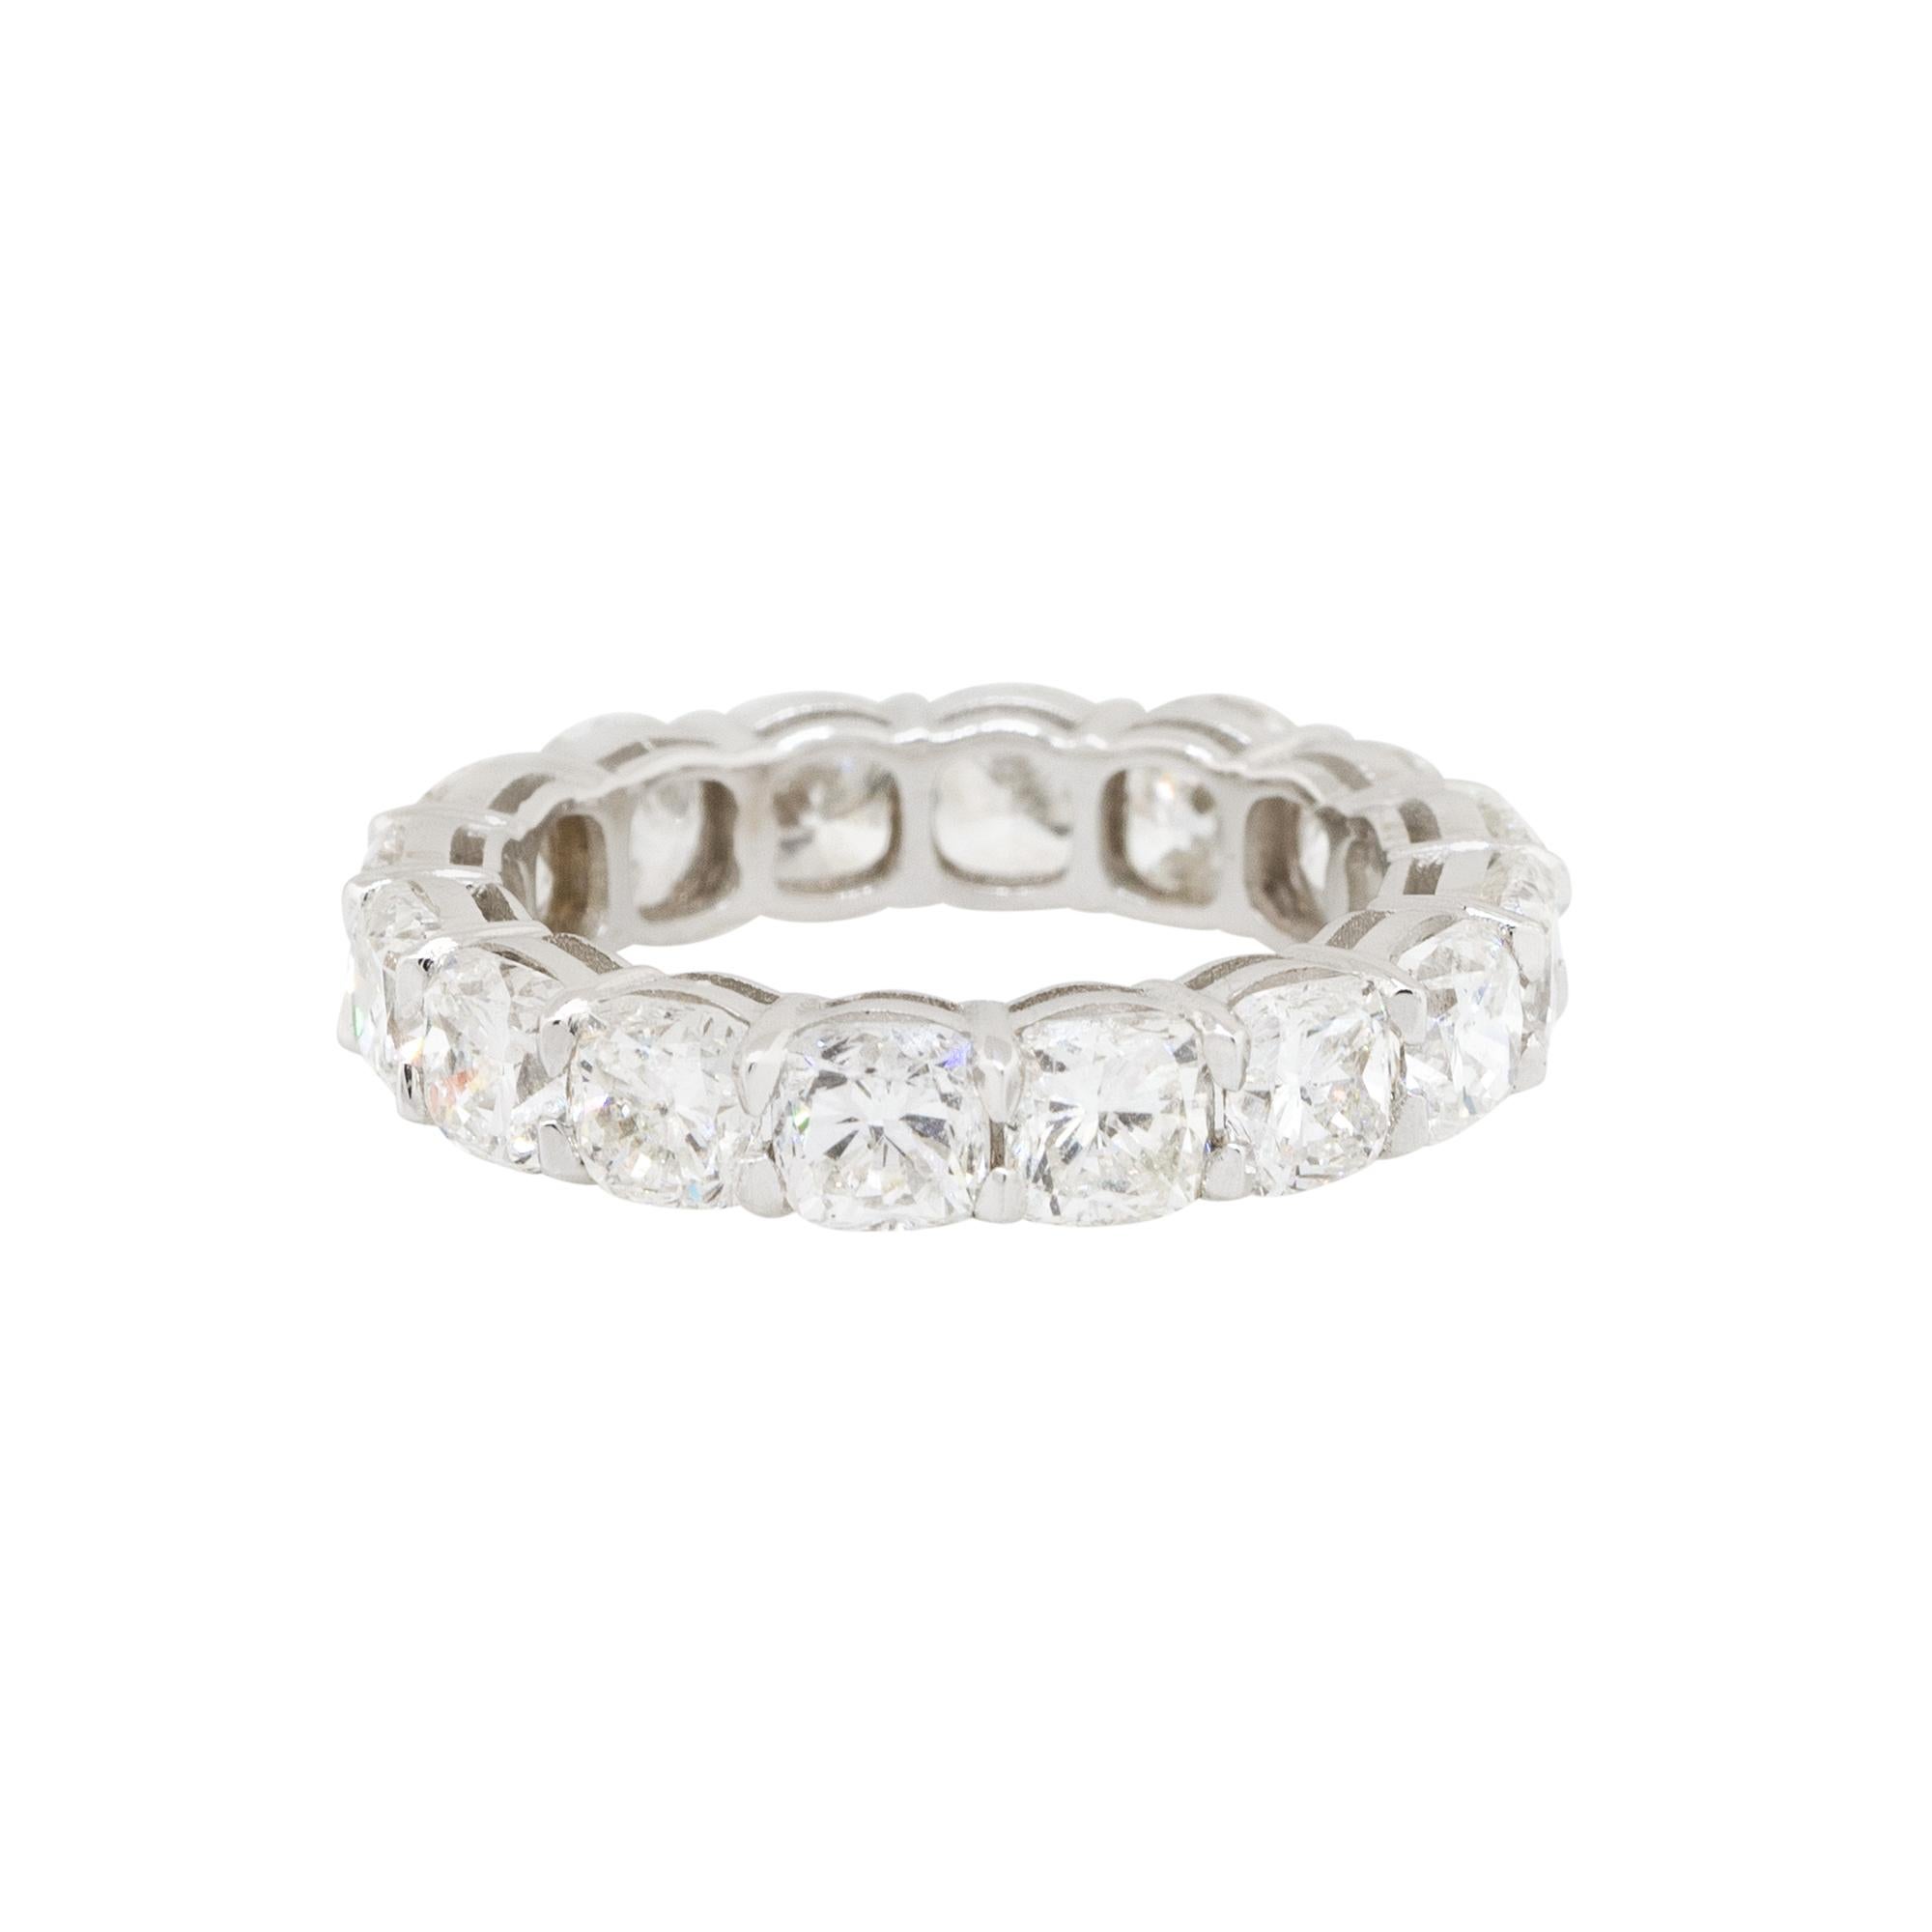 18k White Gold 6.71ctw Cushion Cut Diamond Eternity Band In Excellent Condition For Sale In Boca Raton, FL